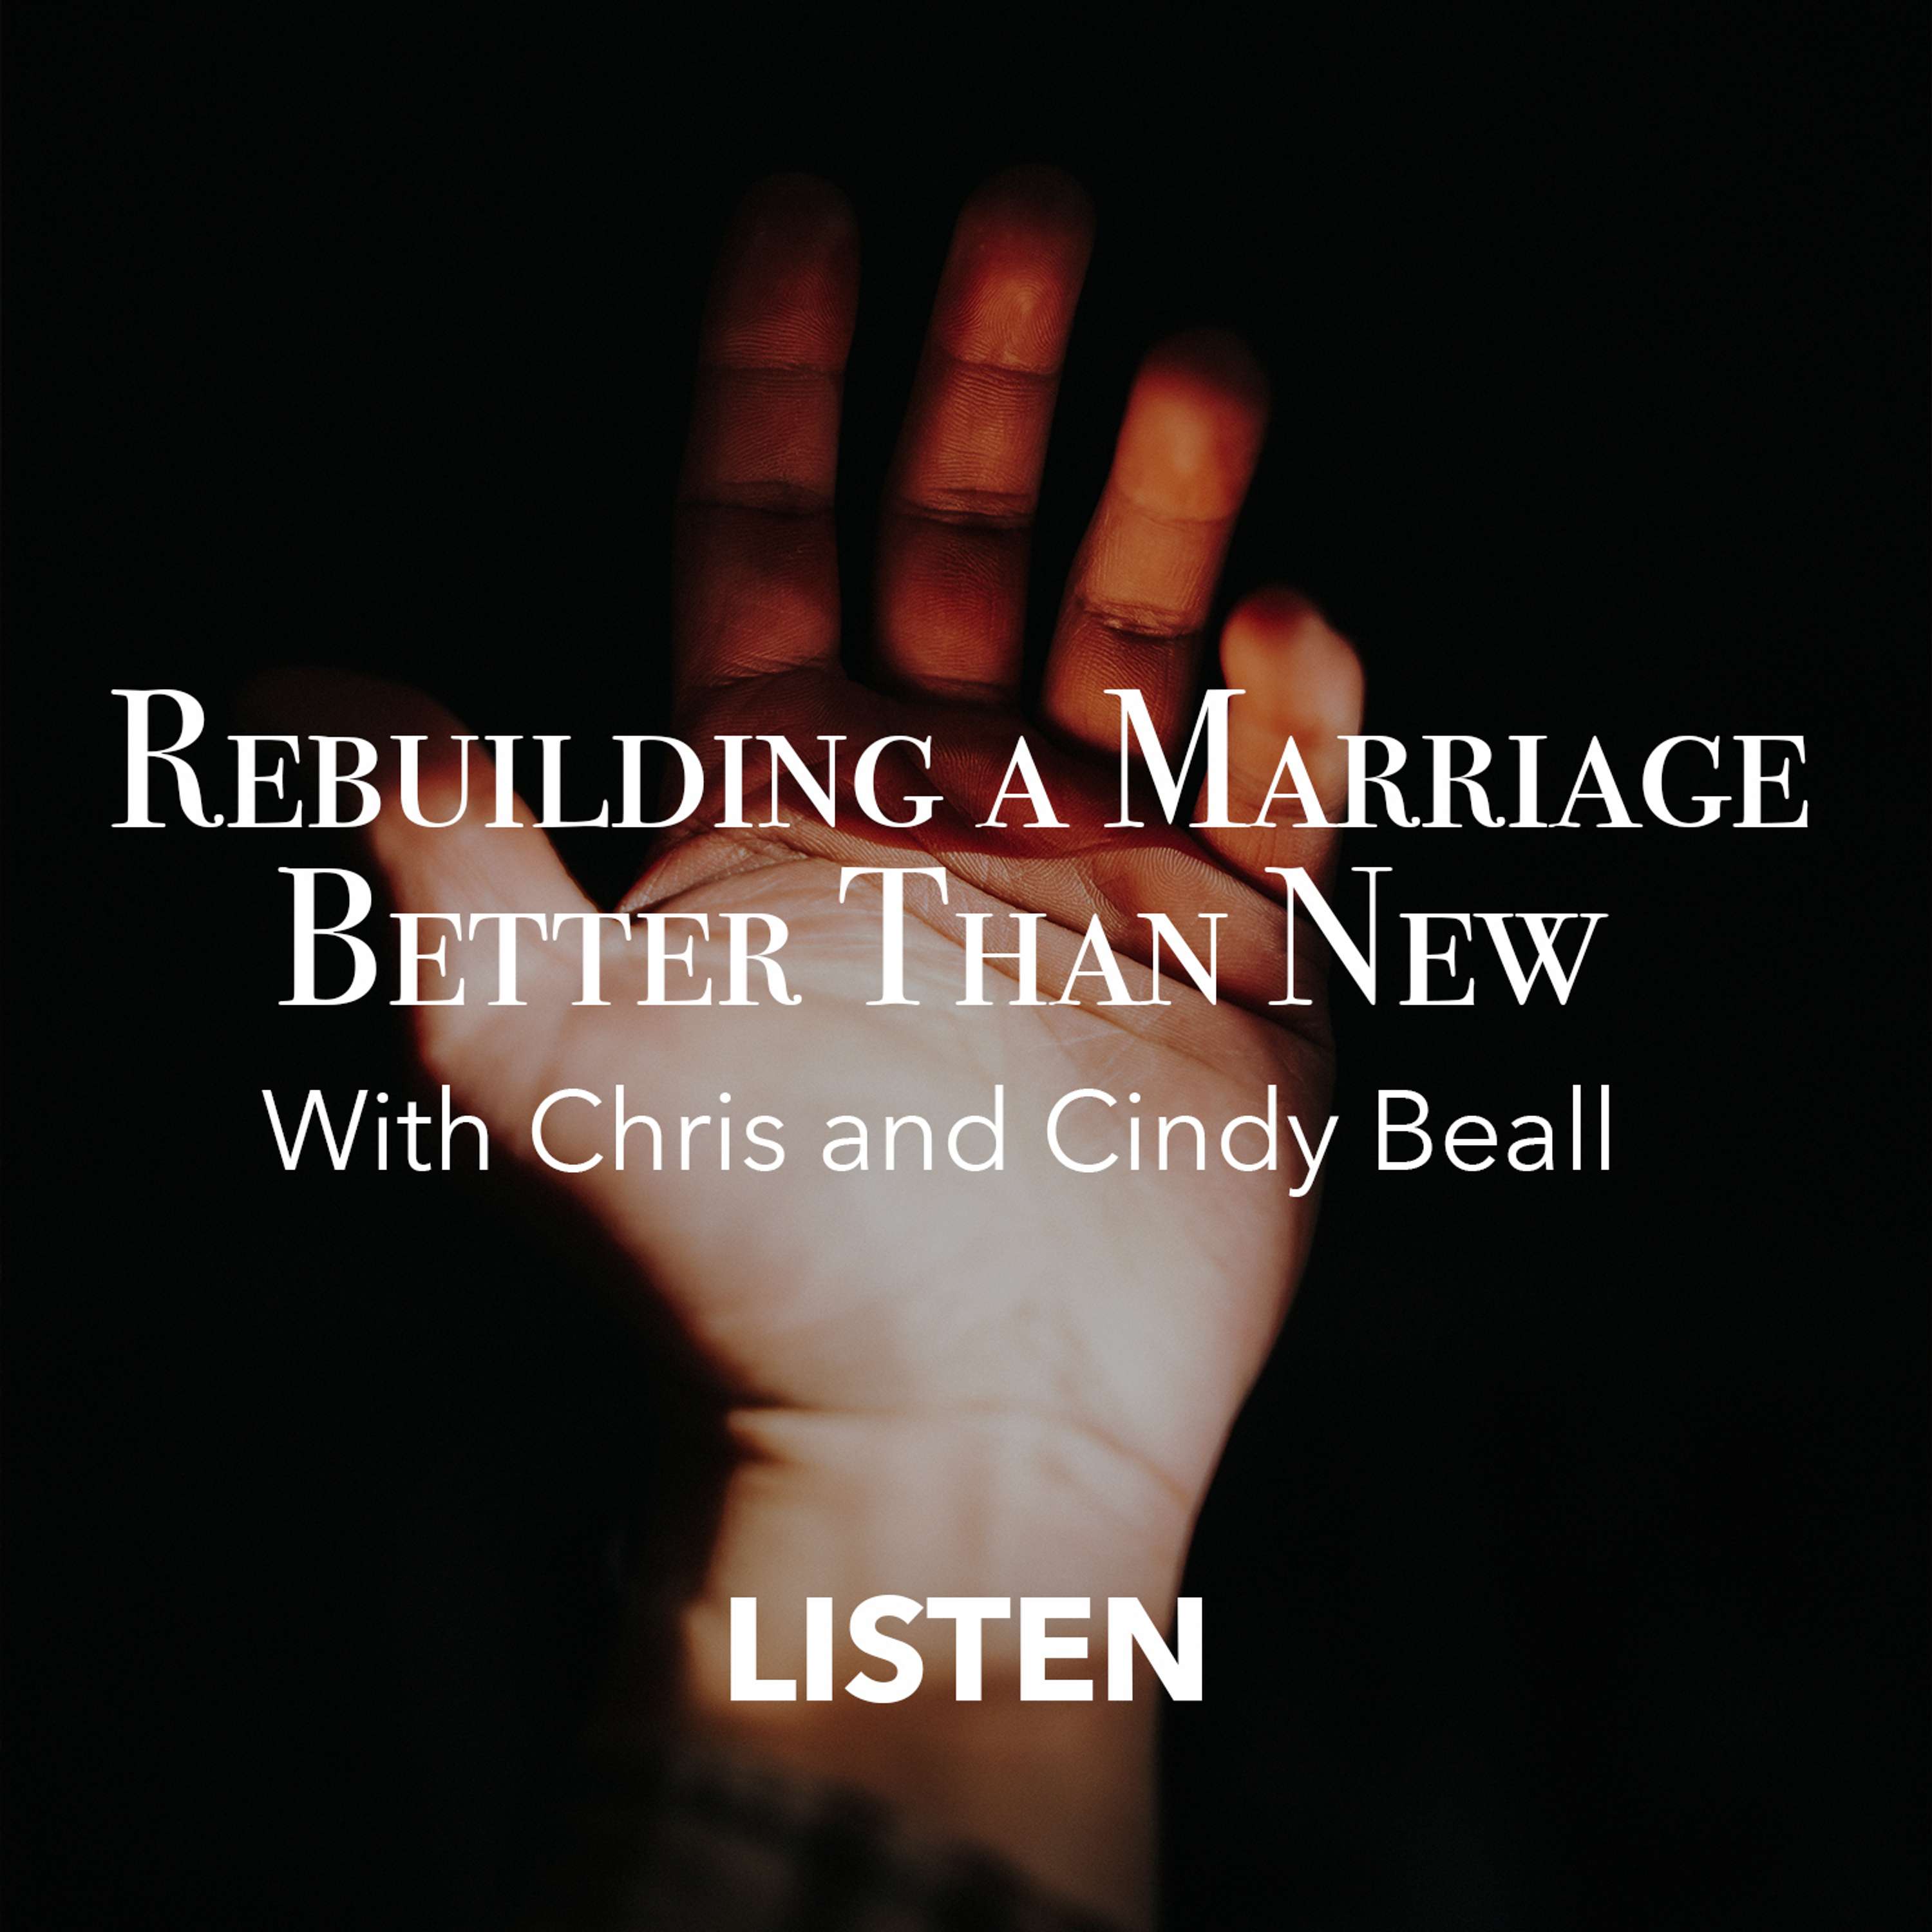 Rebuilding a Marriage Better Than New (Part 2) - Chris and Cindy Beall